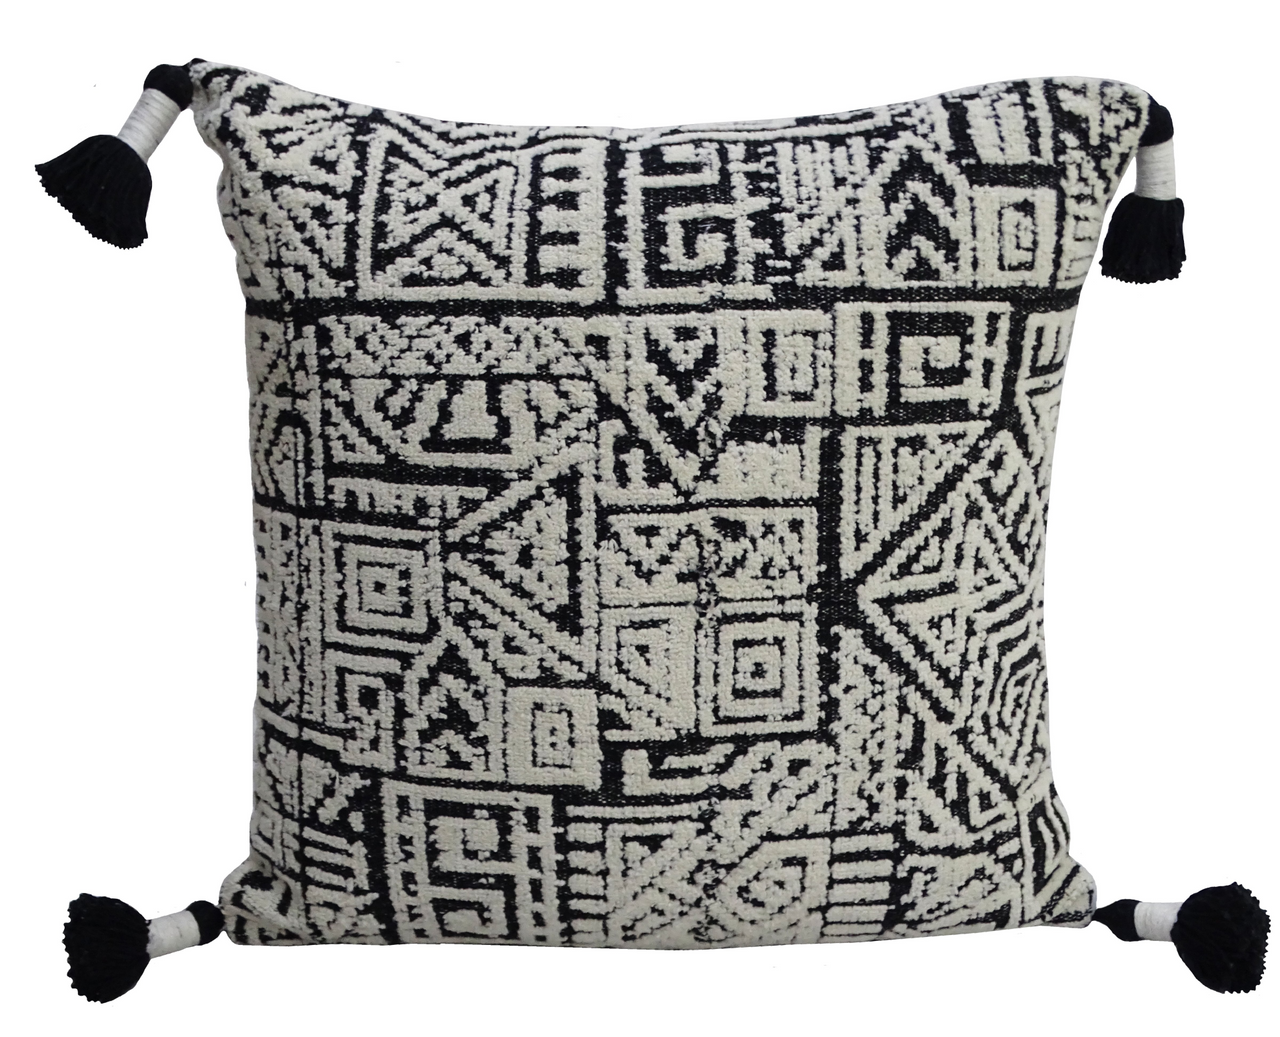 20" x 20" Throw Pillow with Tassels for Decoration